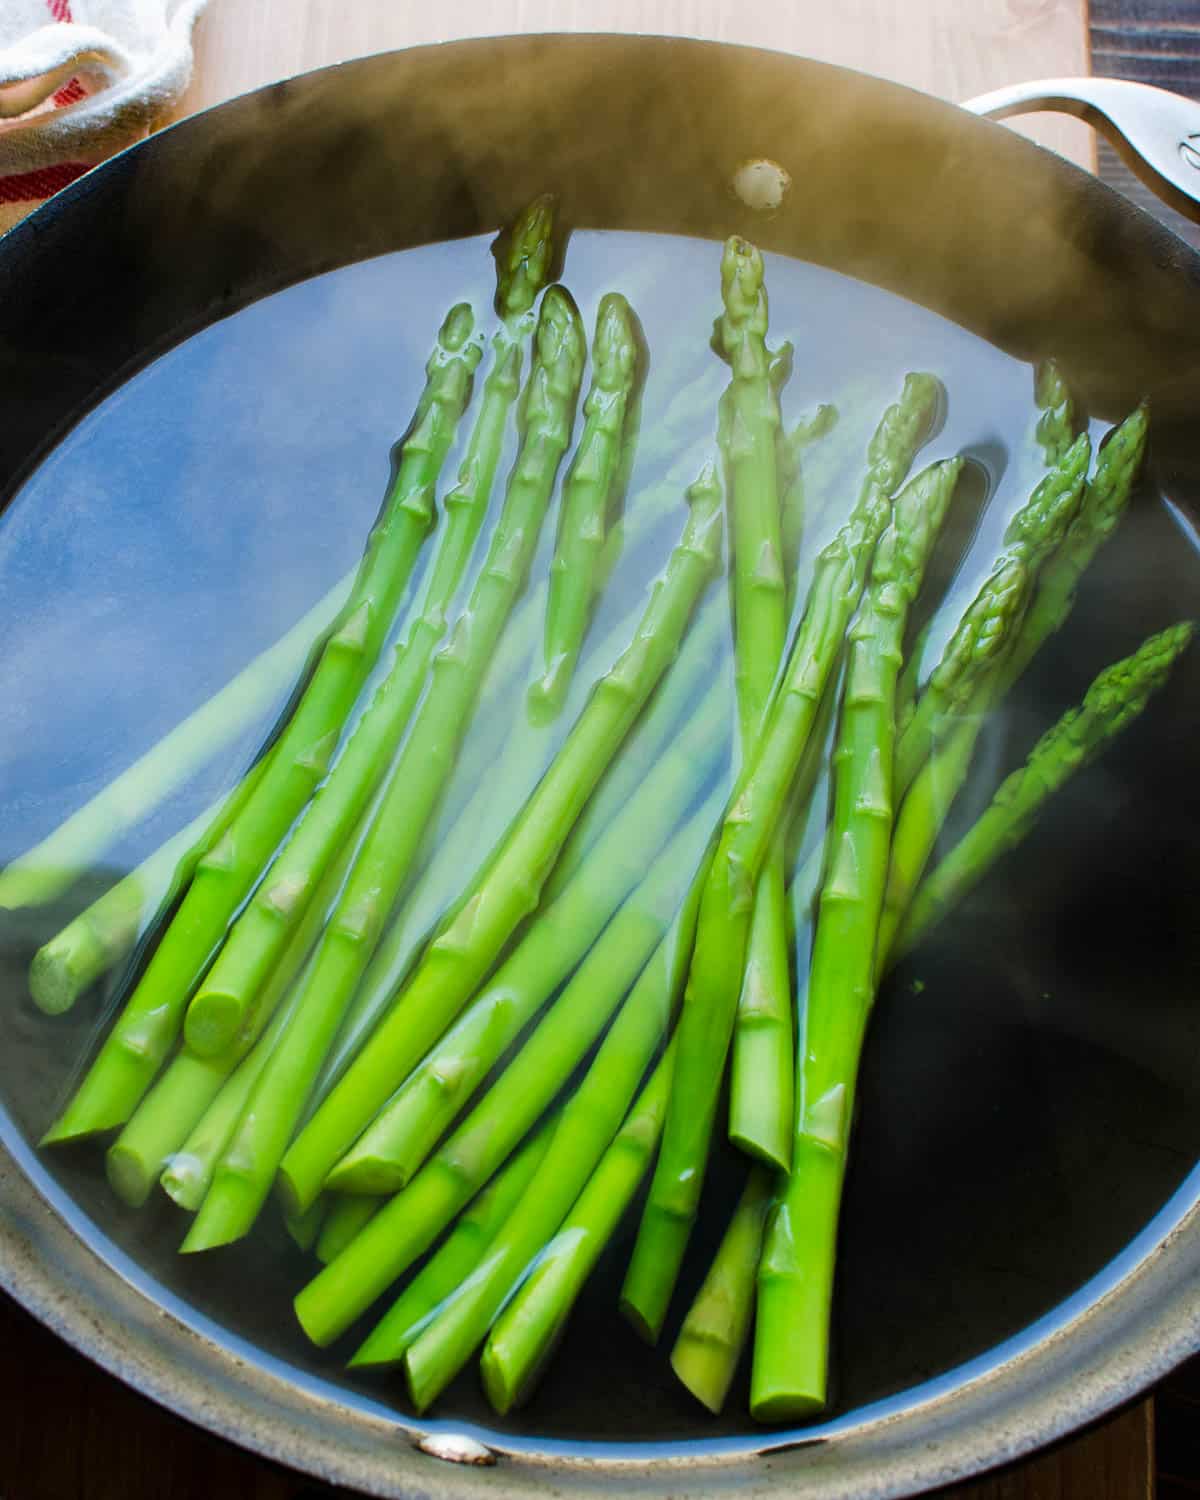 Blanch the asparagus in boiling water until just tender.